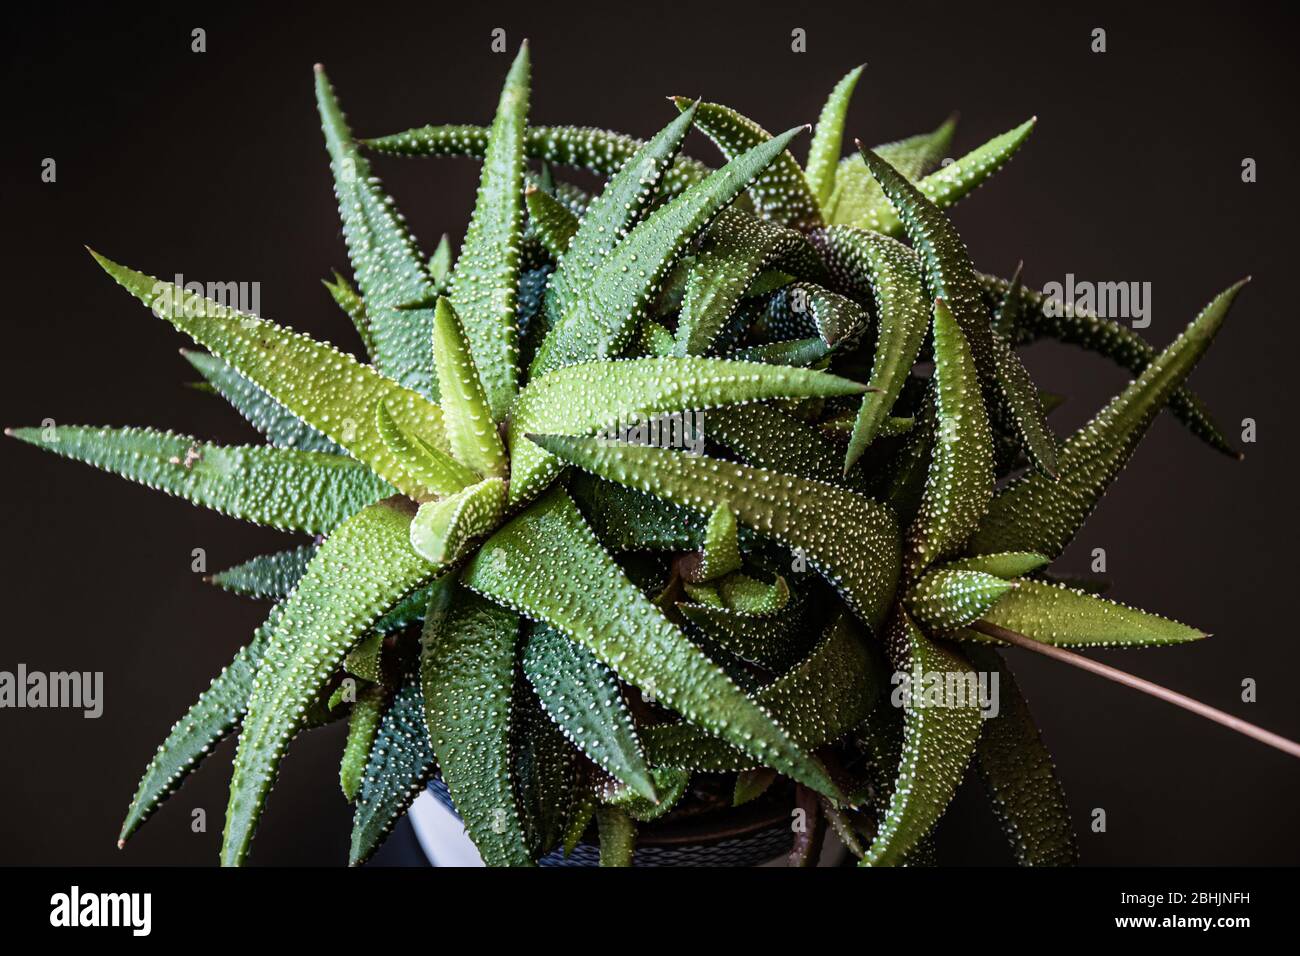 Close-up in low key on haworthia attenuata succulent houseplant forming attractive green rosettes. Striking succulent houseplant on a dark background. Stock Photo